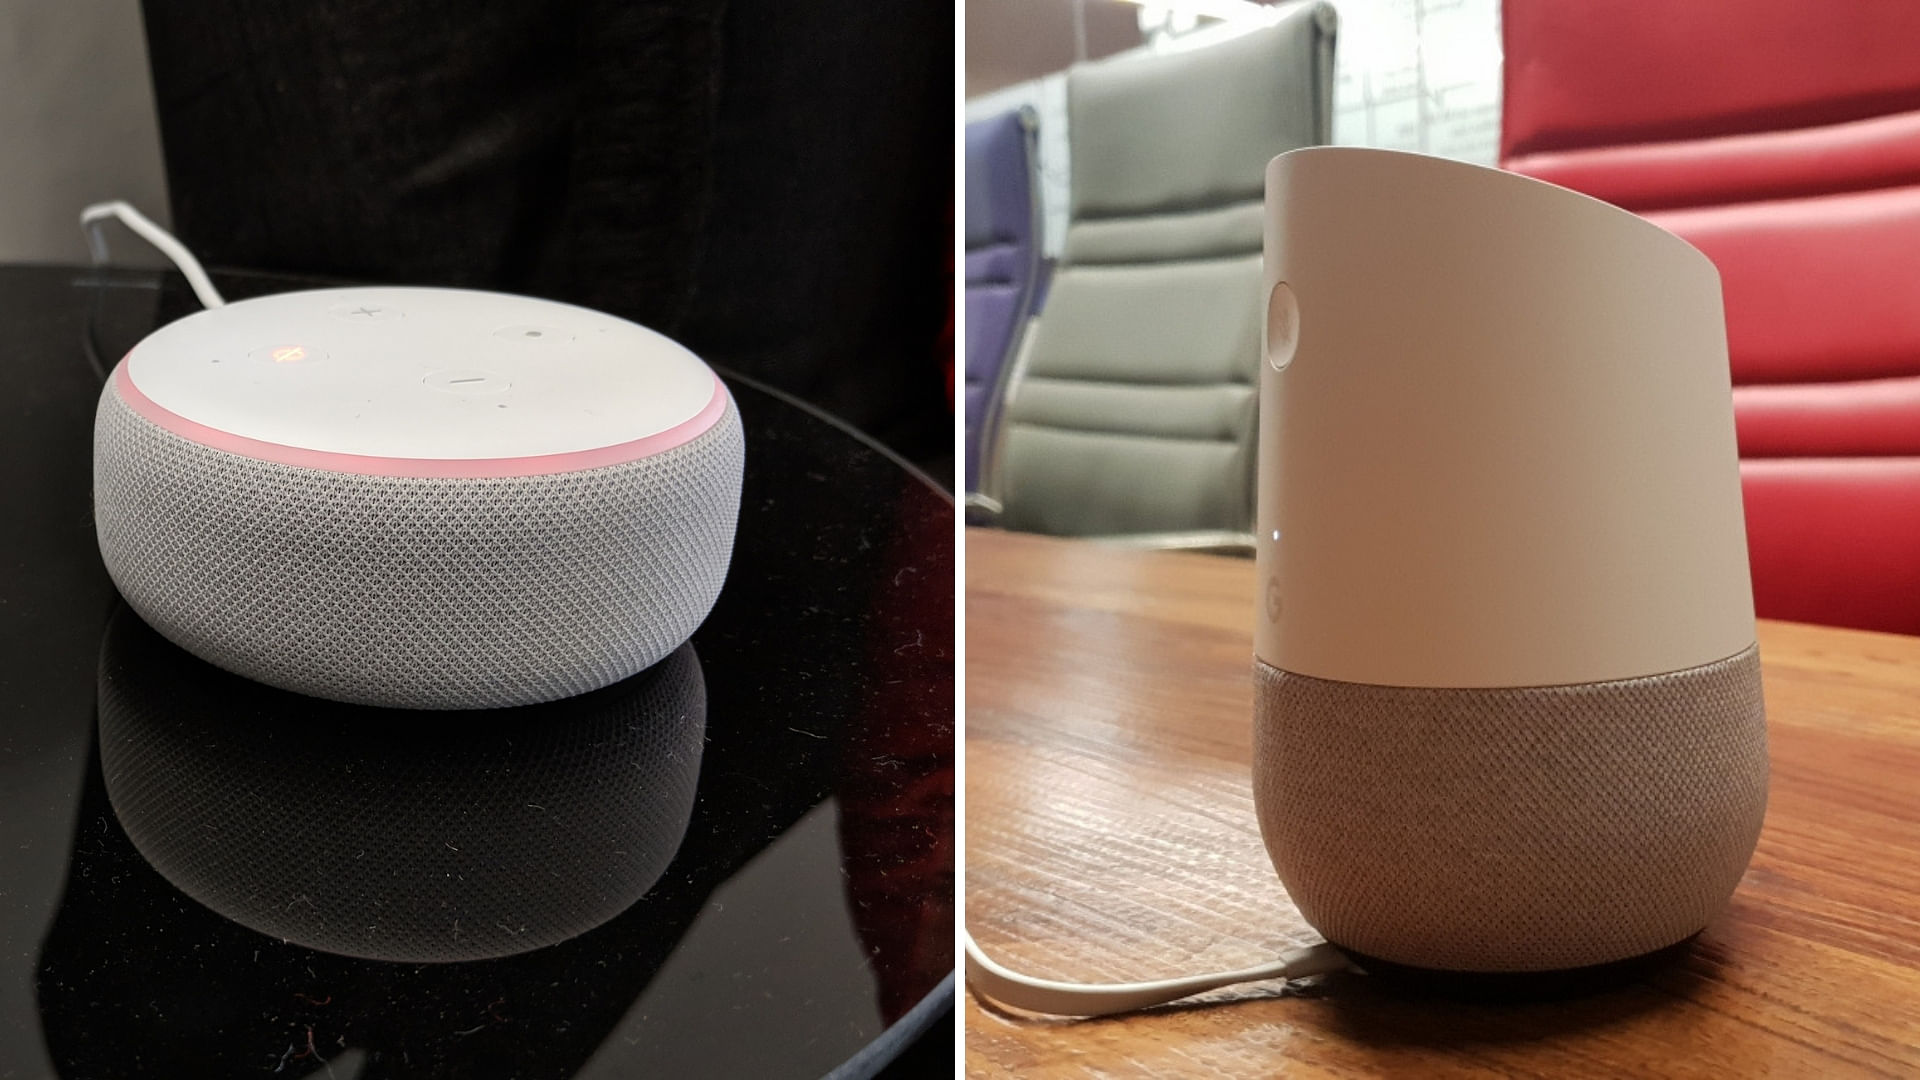 Amazon Echo Dot 2018 (left) and Google Home (right)